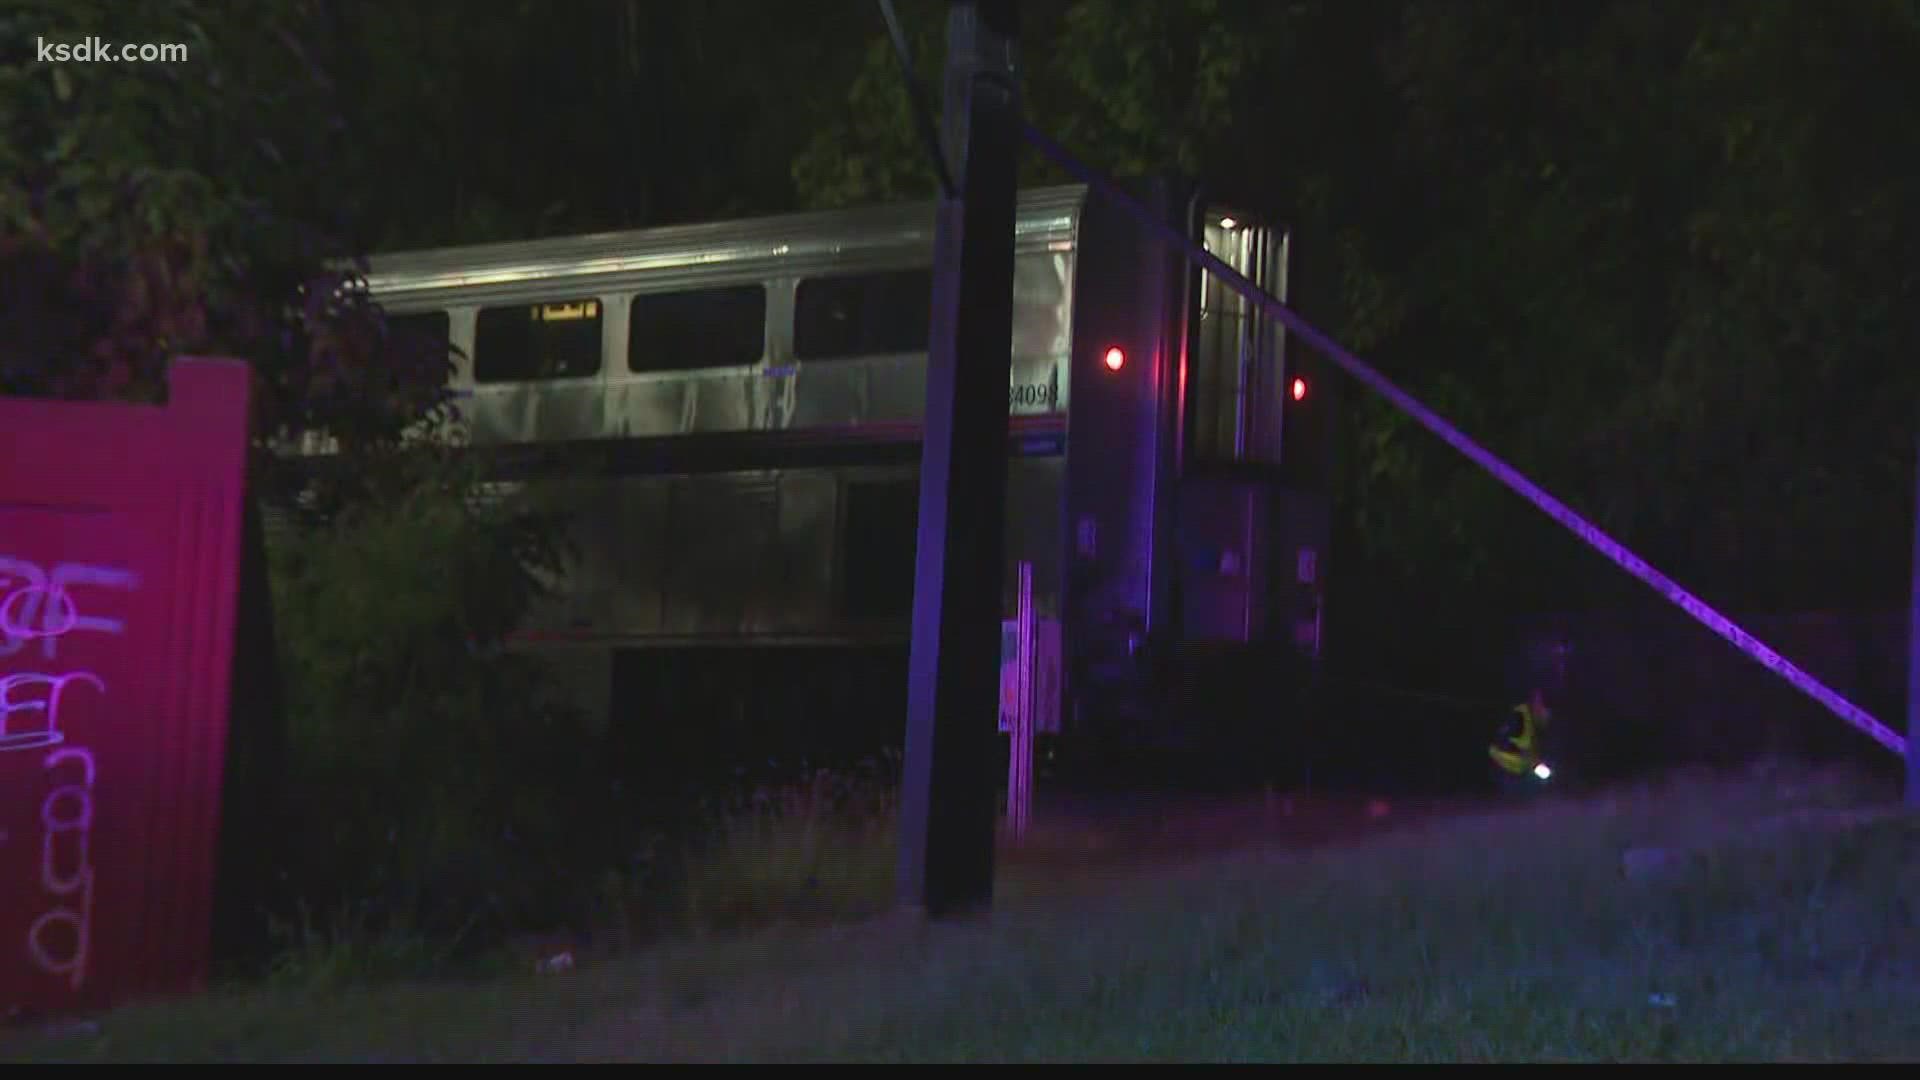 The incident happened near the intersection of Gravois and Bingham Avenues. An Amtrak train was stopped on the tracks in the area